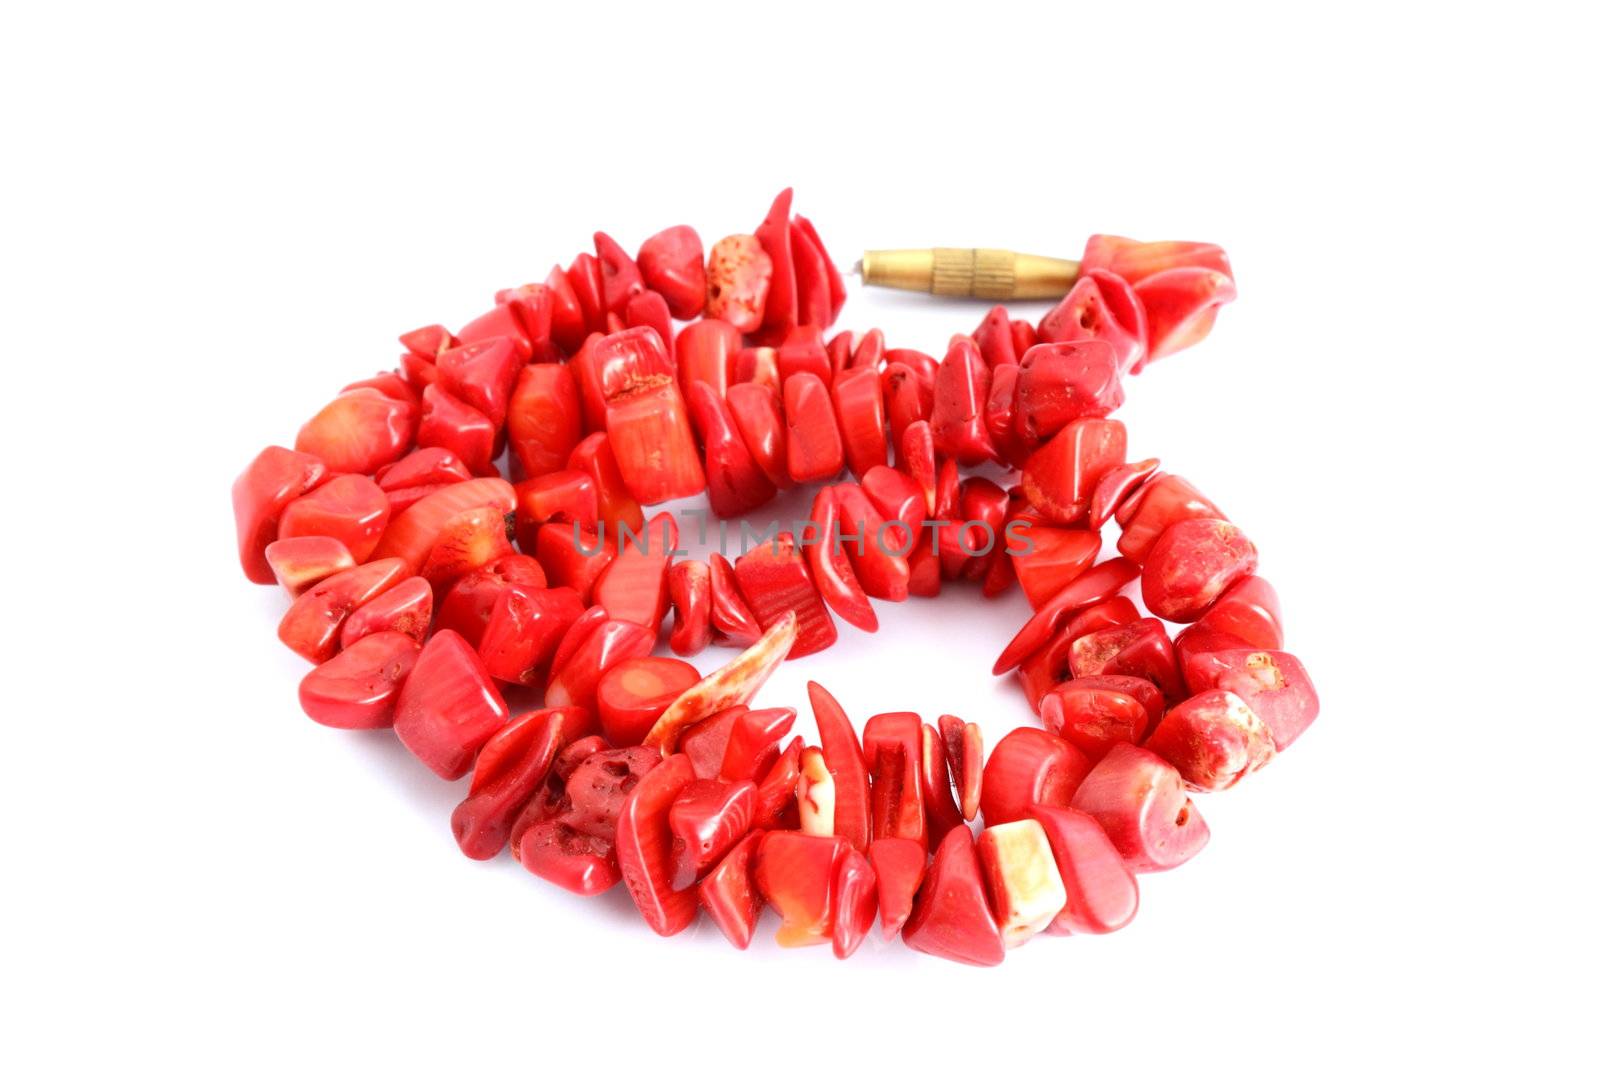 red coral beads over white background